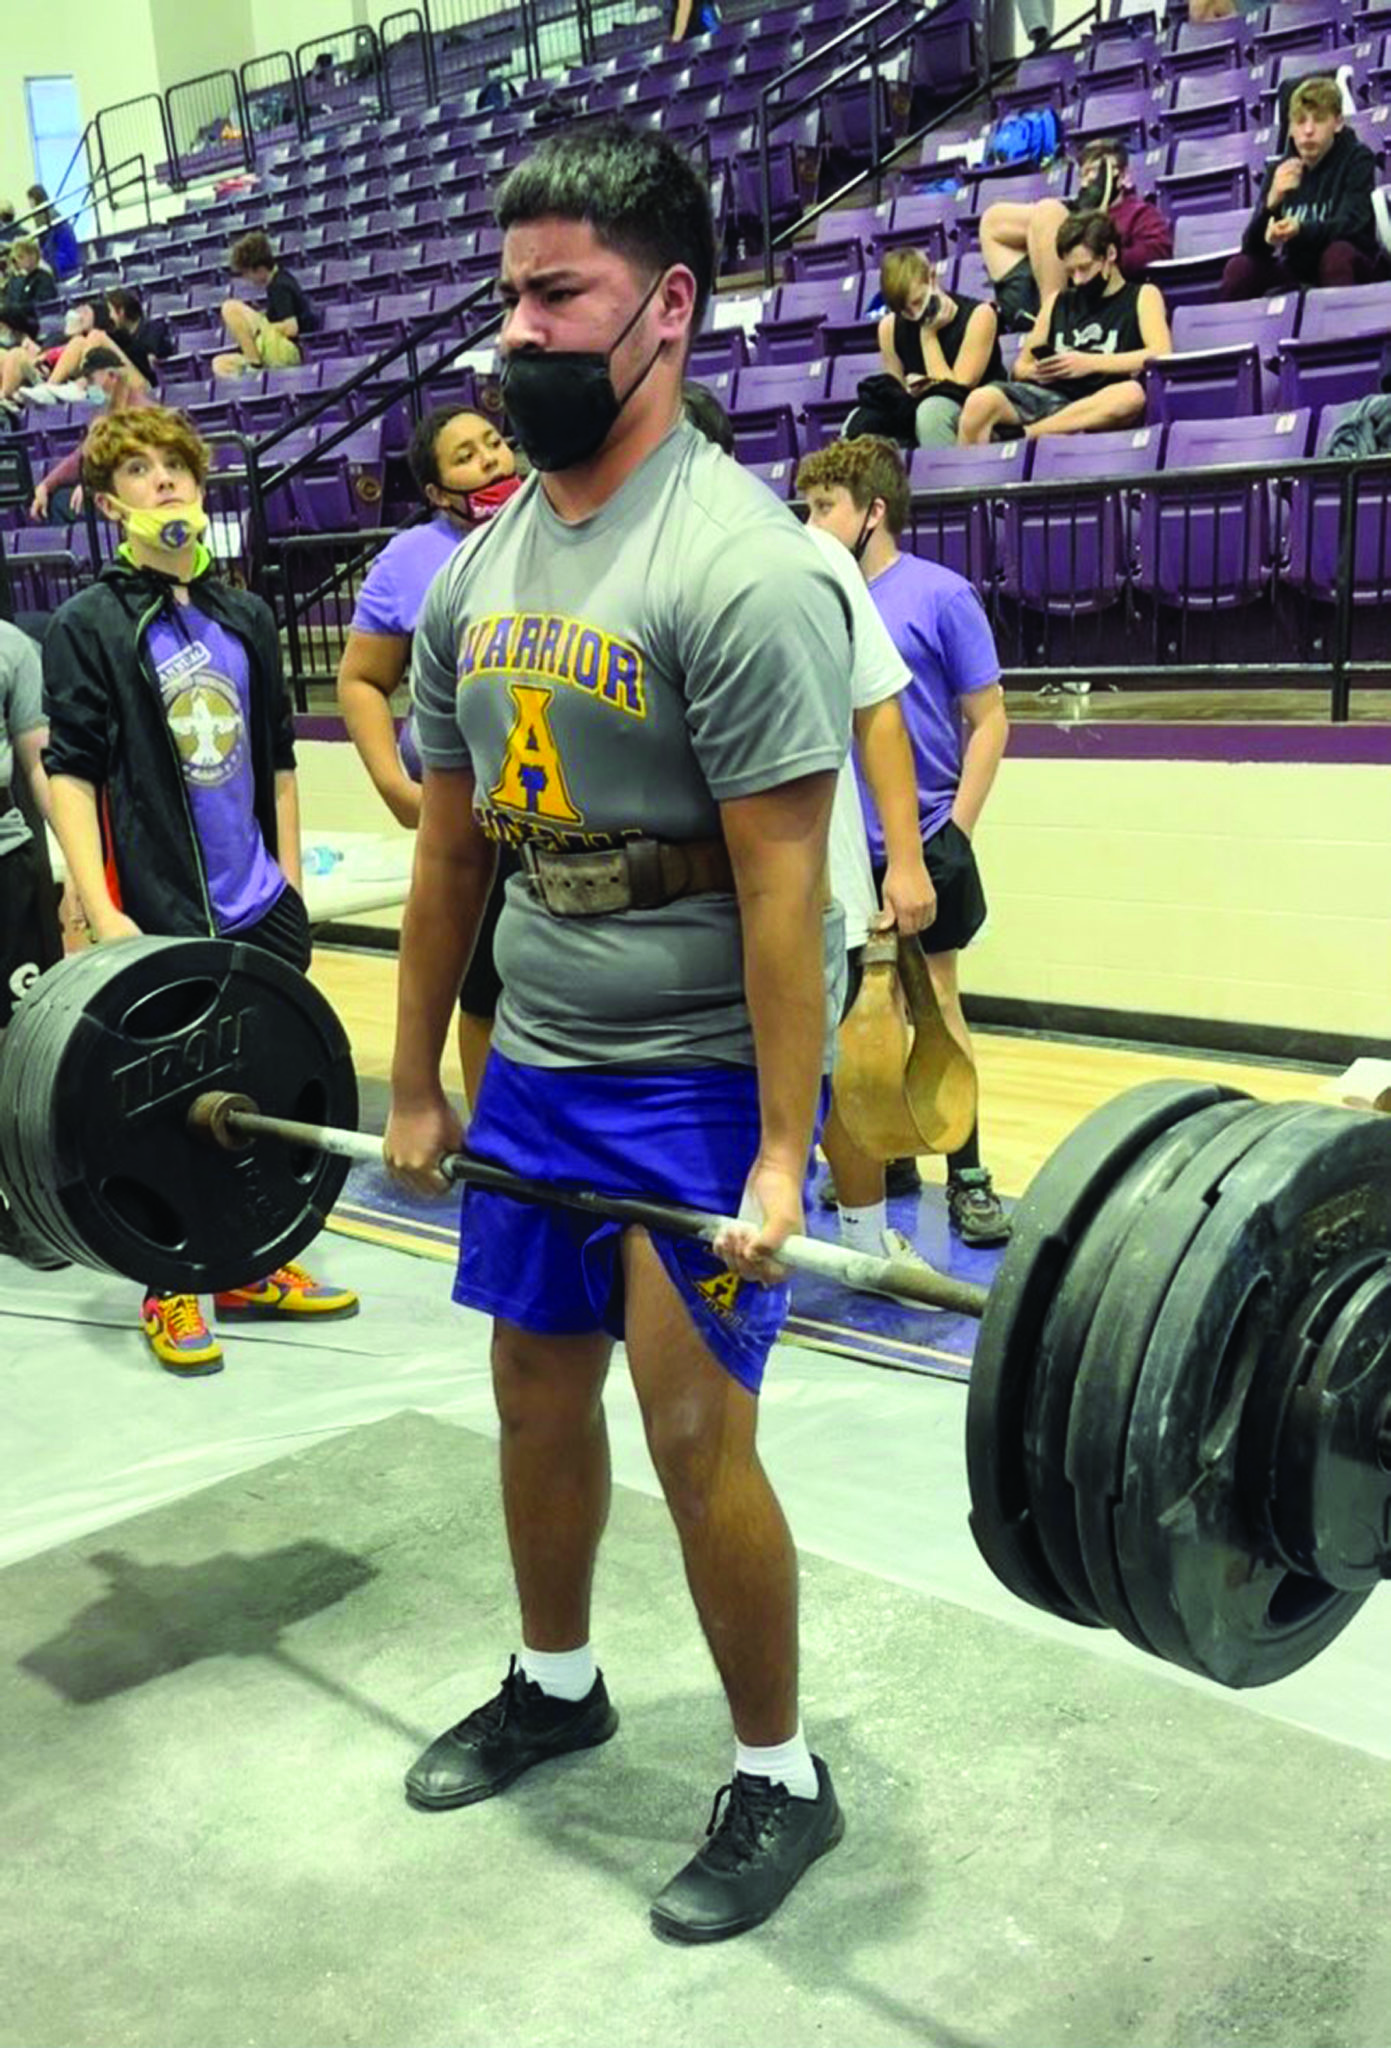 Eli Foreman qualifies for Oklahoma state powerlifting meets • The